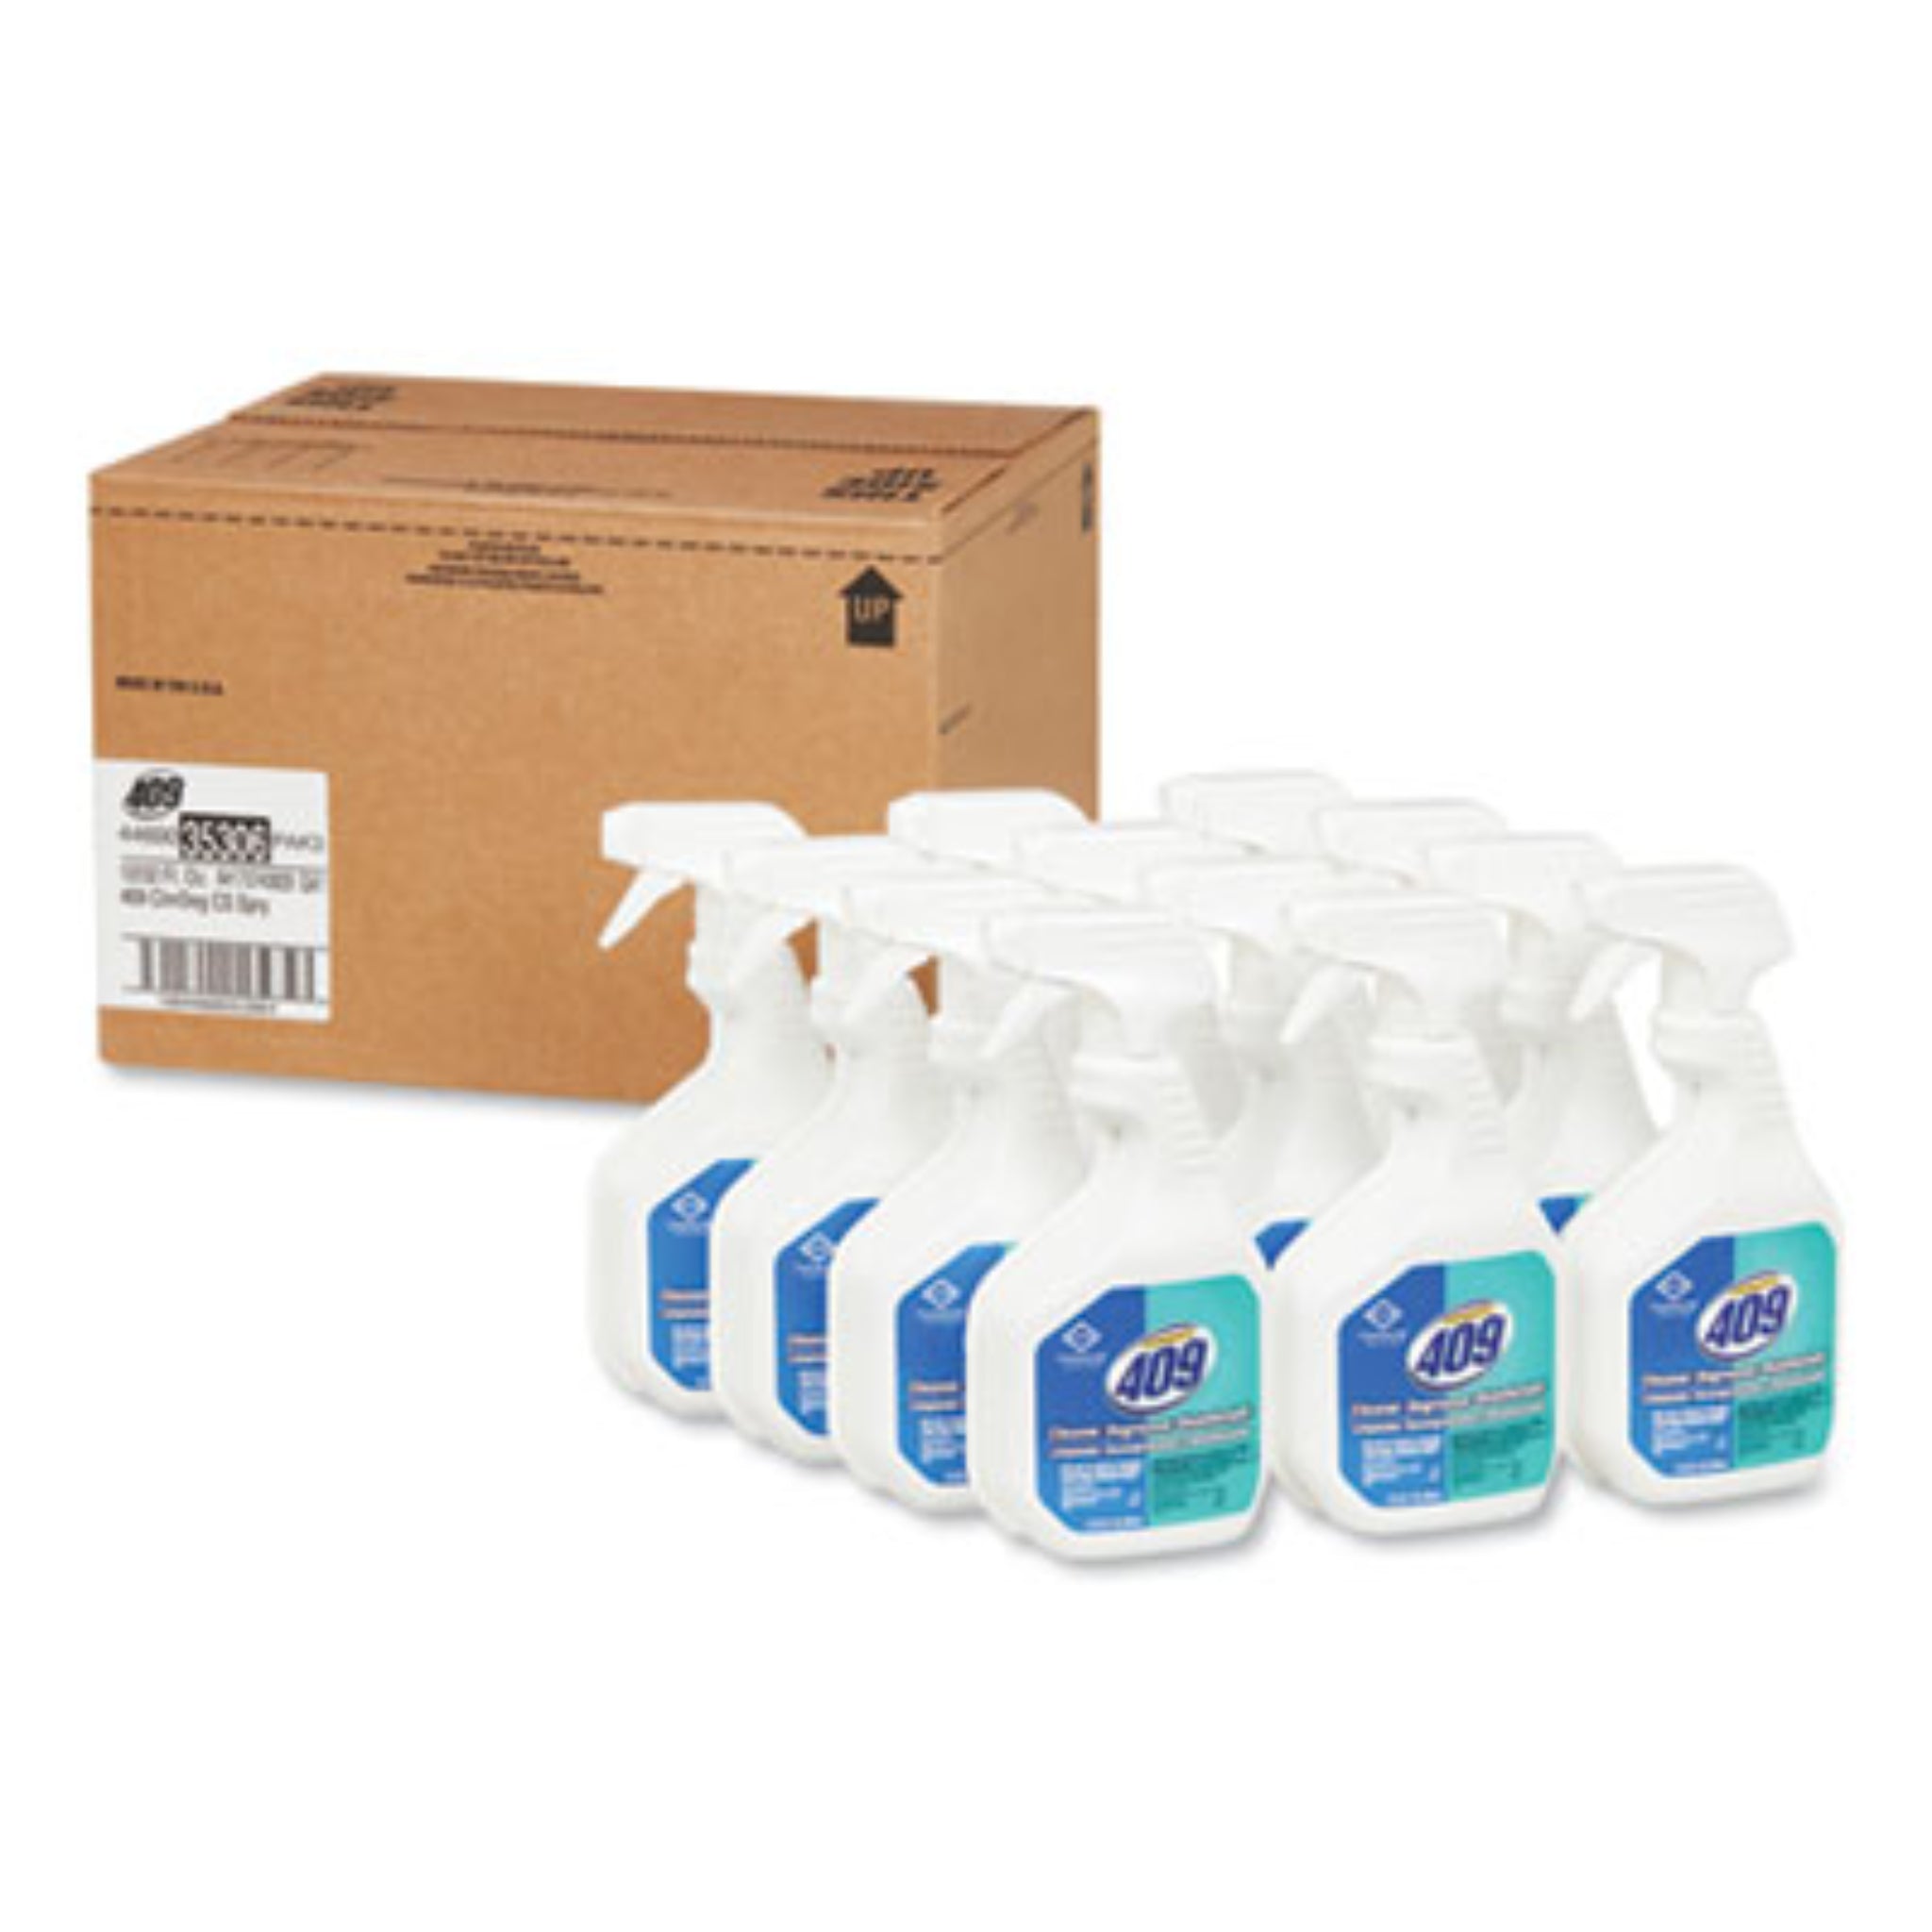 CLOROX SALES CO. CLO35306EA Cleaner Degreaser Disinfectant, 32 Oz Spray, 1 Each